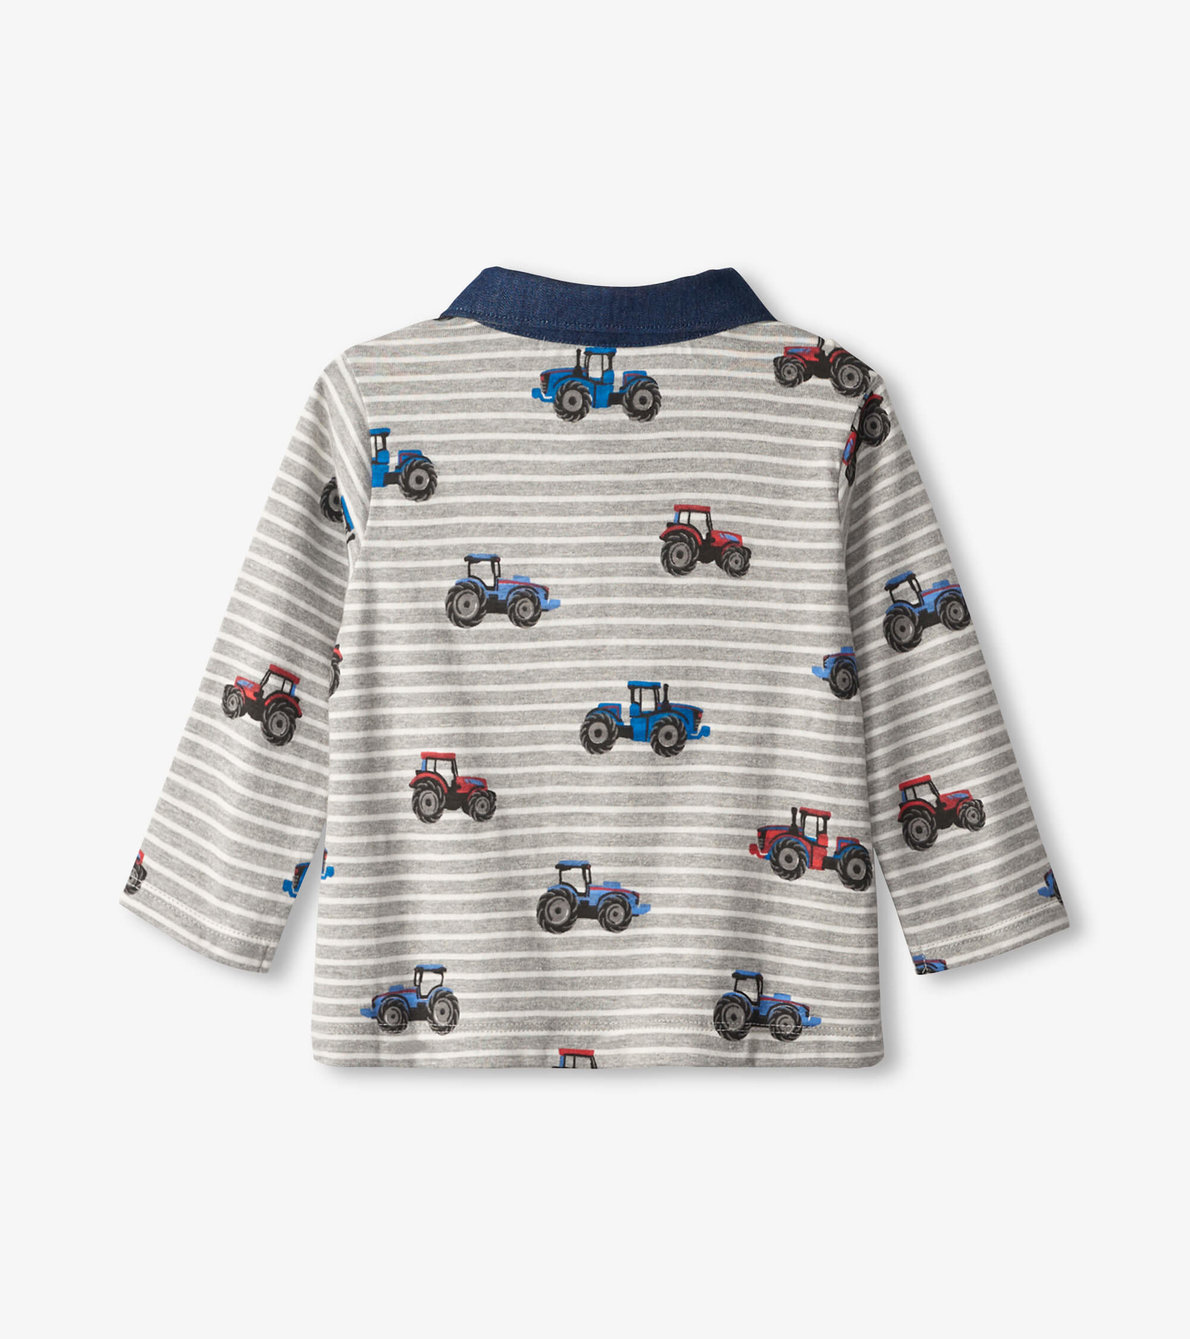 View larger image of Retro Tractors Long Sleeve Baby Polo Tee